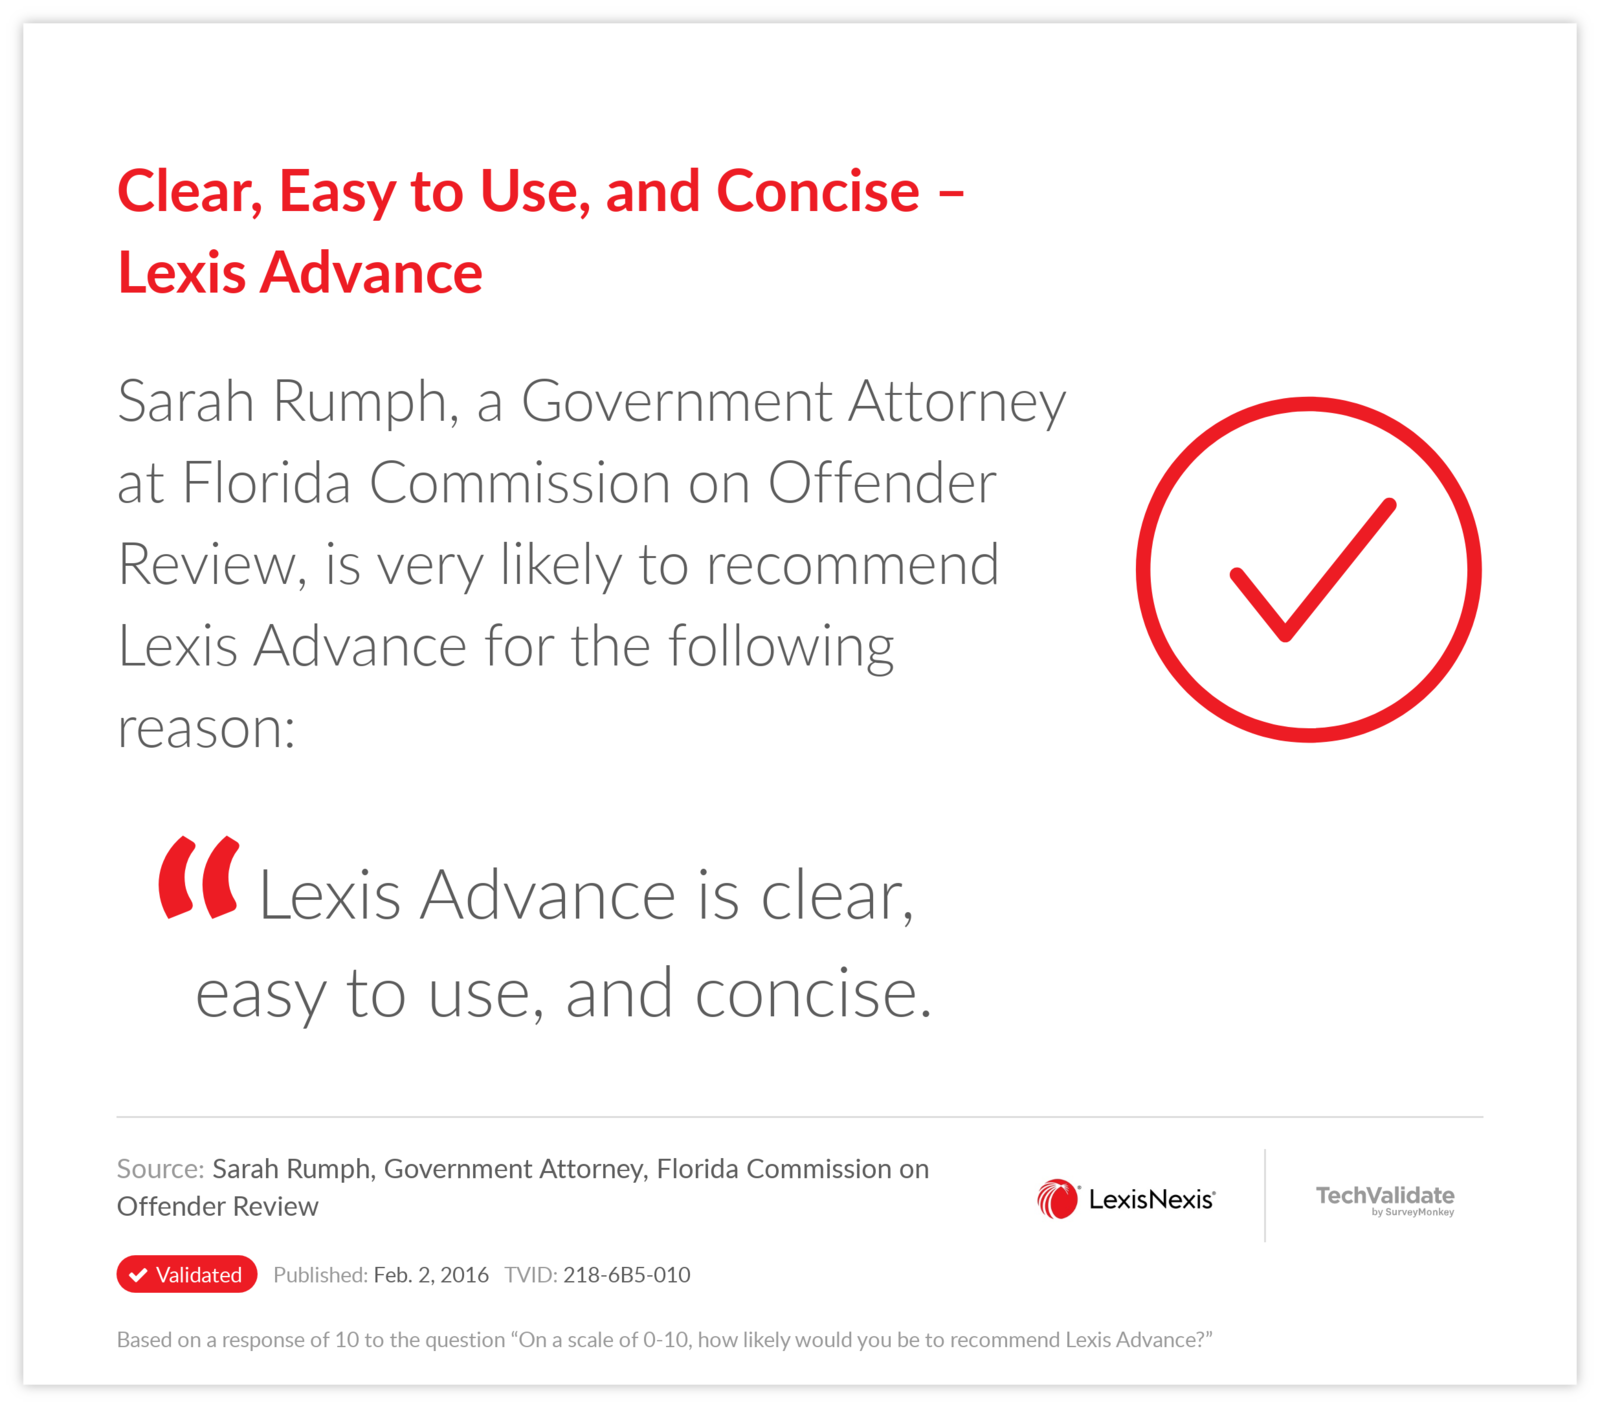 Clear, Easy to Use, and Concise-Lexis Advance